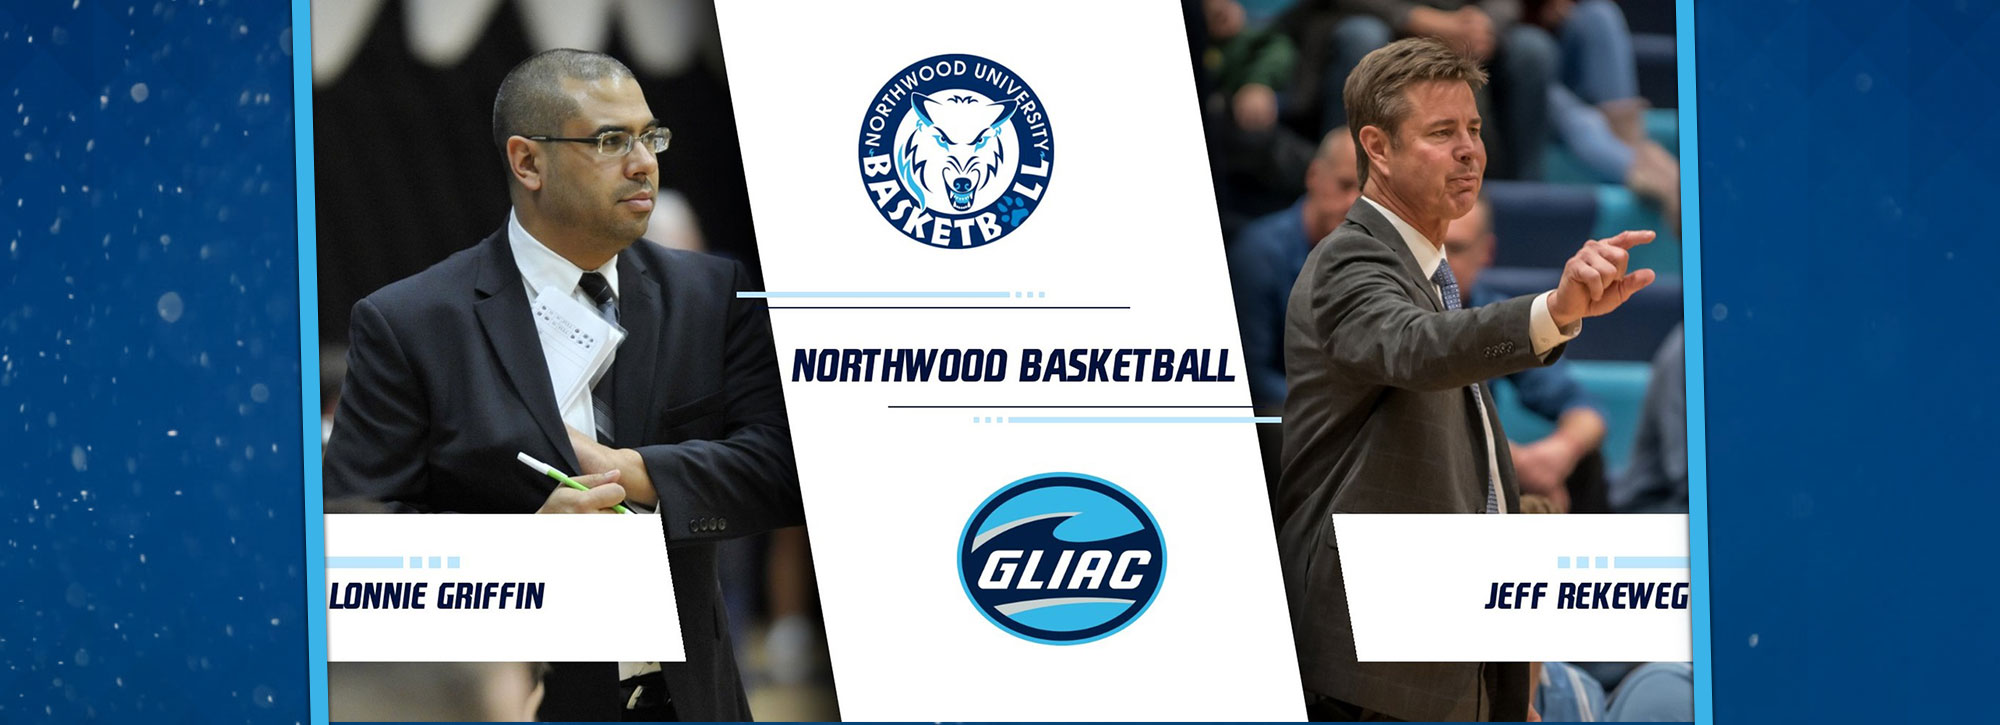 Jeff Rekeweg Takes New Position At Northwood - Lonnie Griffin Named Head Men's Basketball Coach